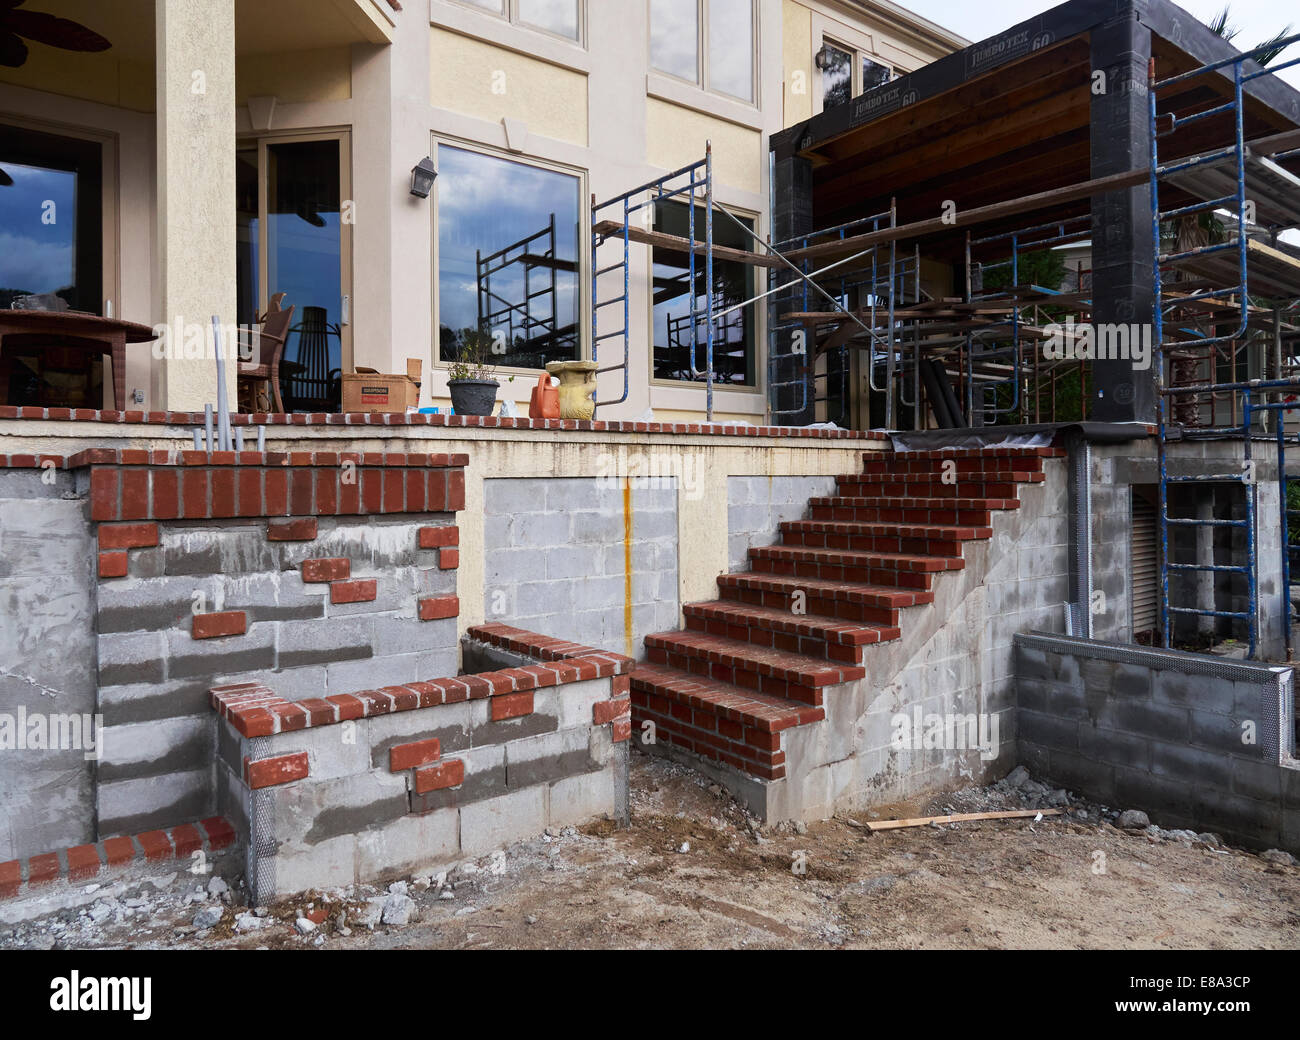 Decorative brickwork, new brick stairs, and scaffolding on a construction project. Stock Photo